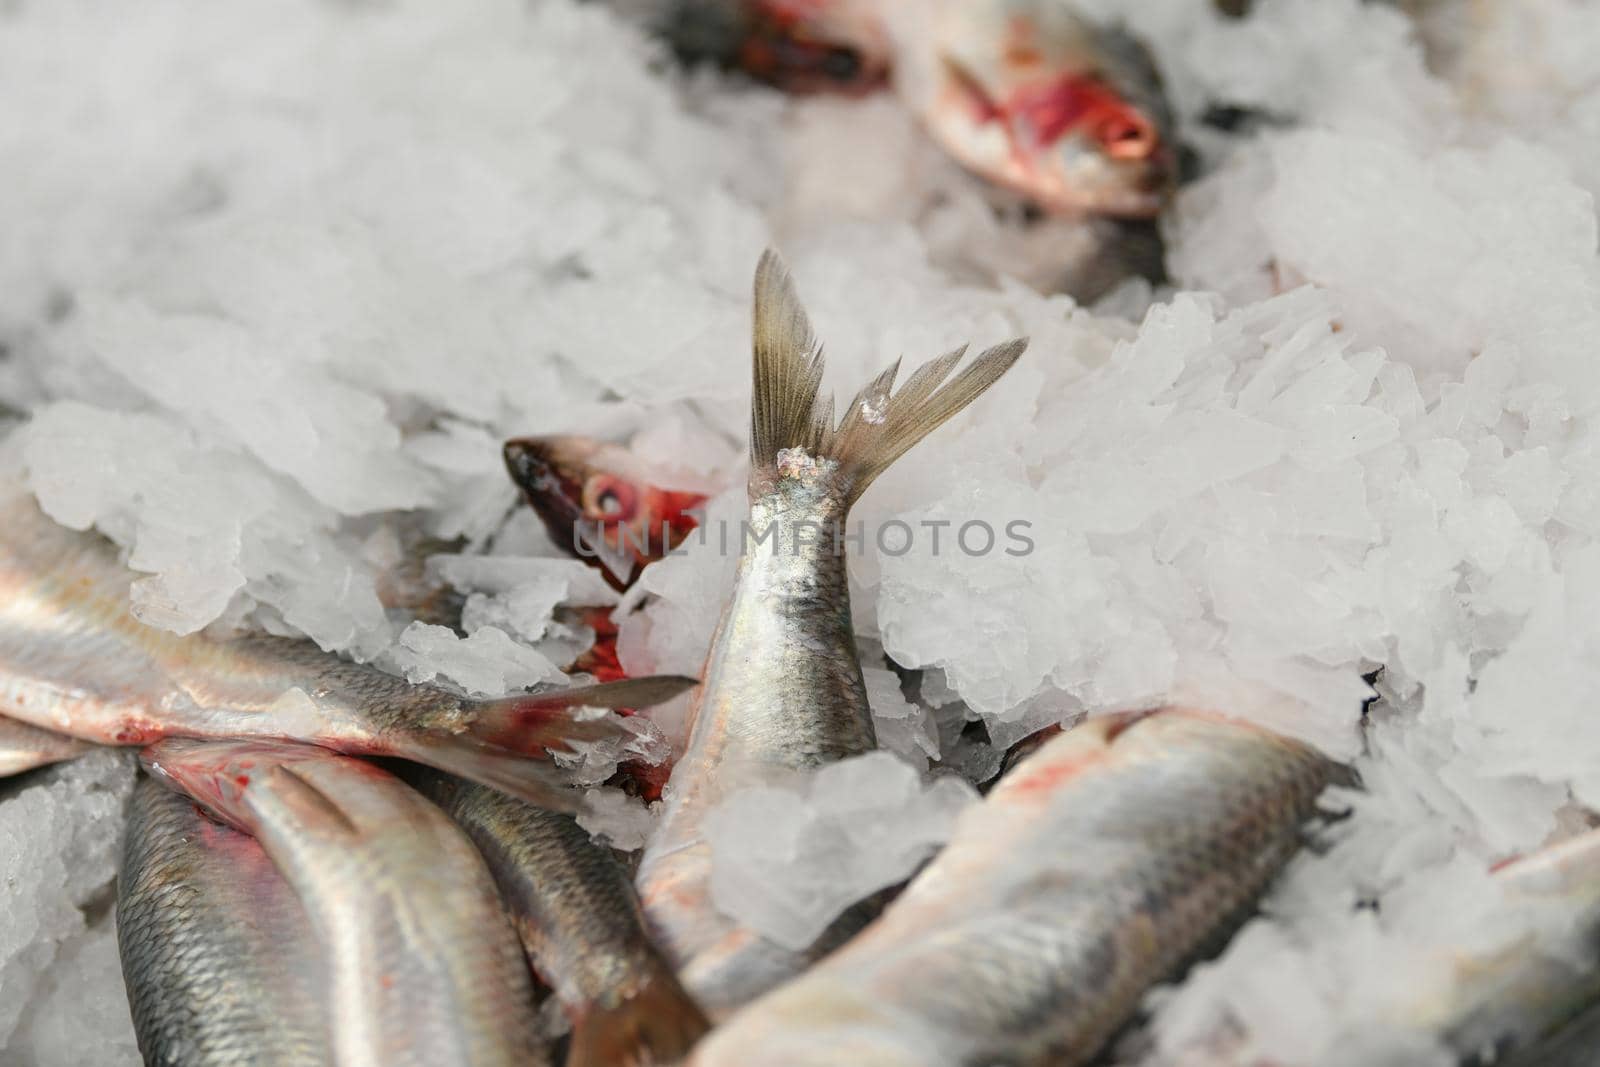 Raw herring with ice on the market